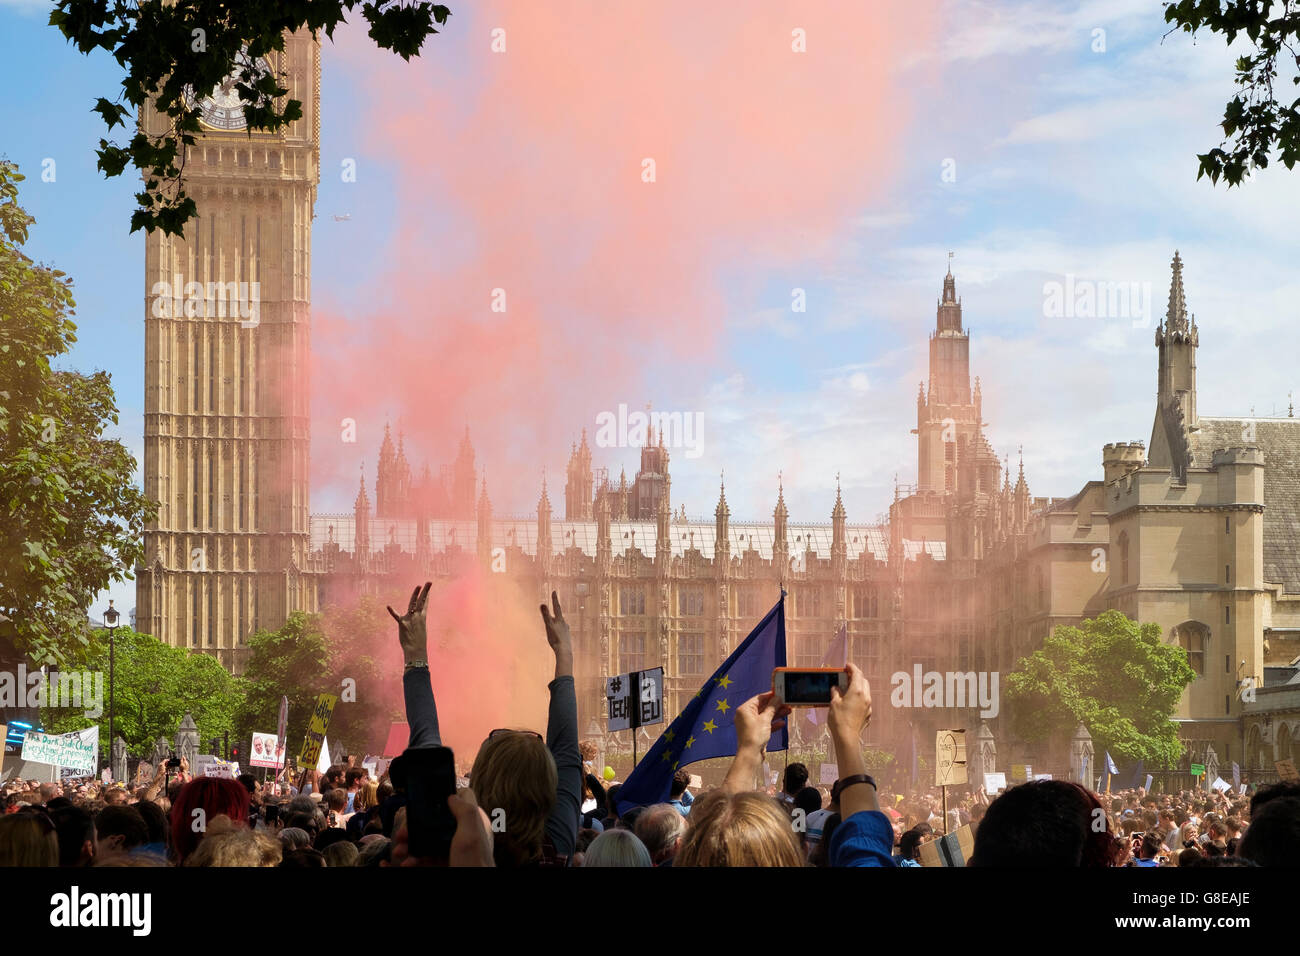 London, UK , 2 July 2016: Crowds of protesters on the March for Europe demonstration at Parliament Square setting off flares in voicing their support for Parliament overturning the Brexit EU referendum result. Credit:  Scott Hortop /  Alamy Live News Stock Photo